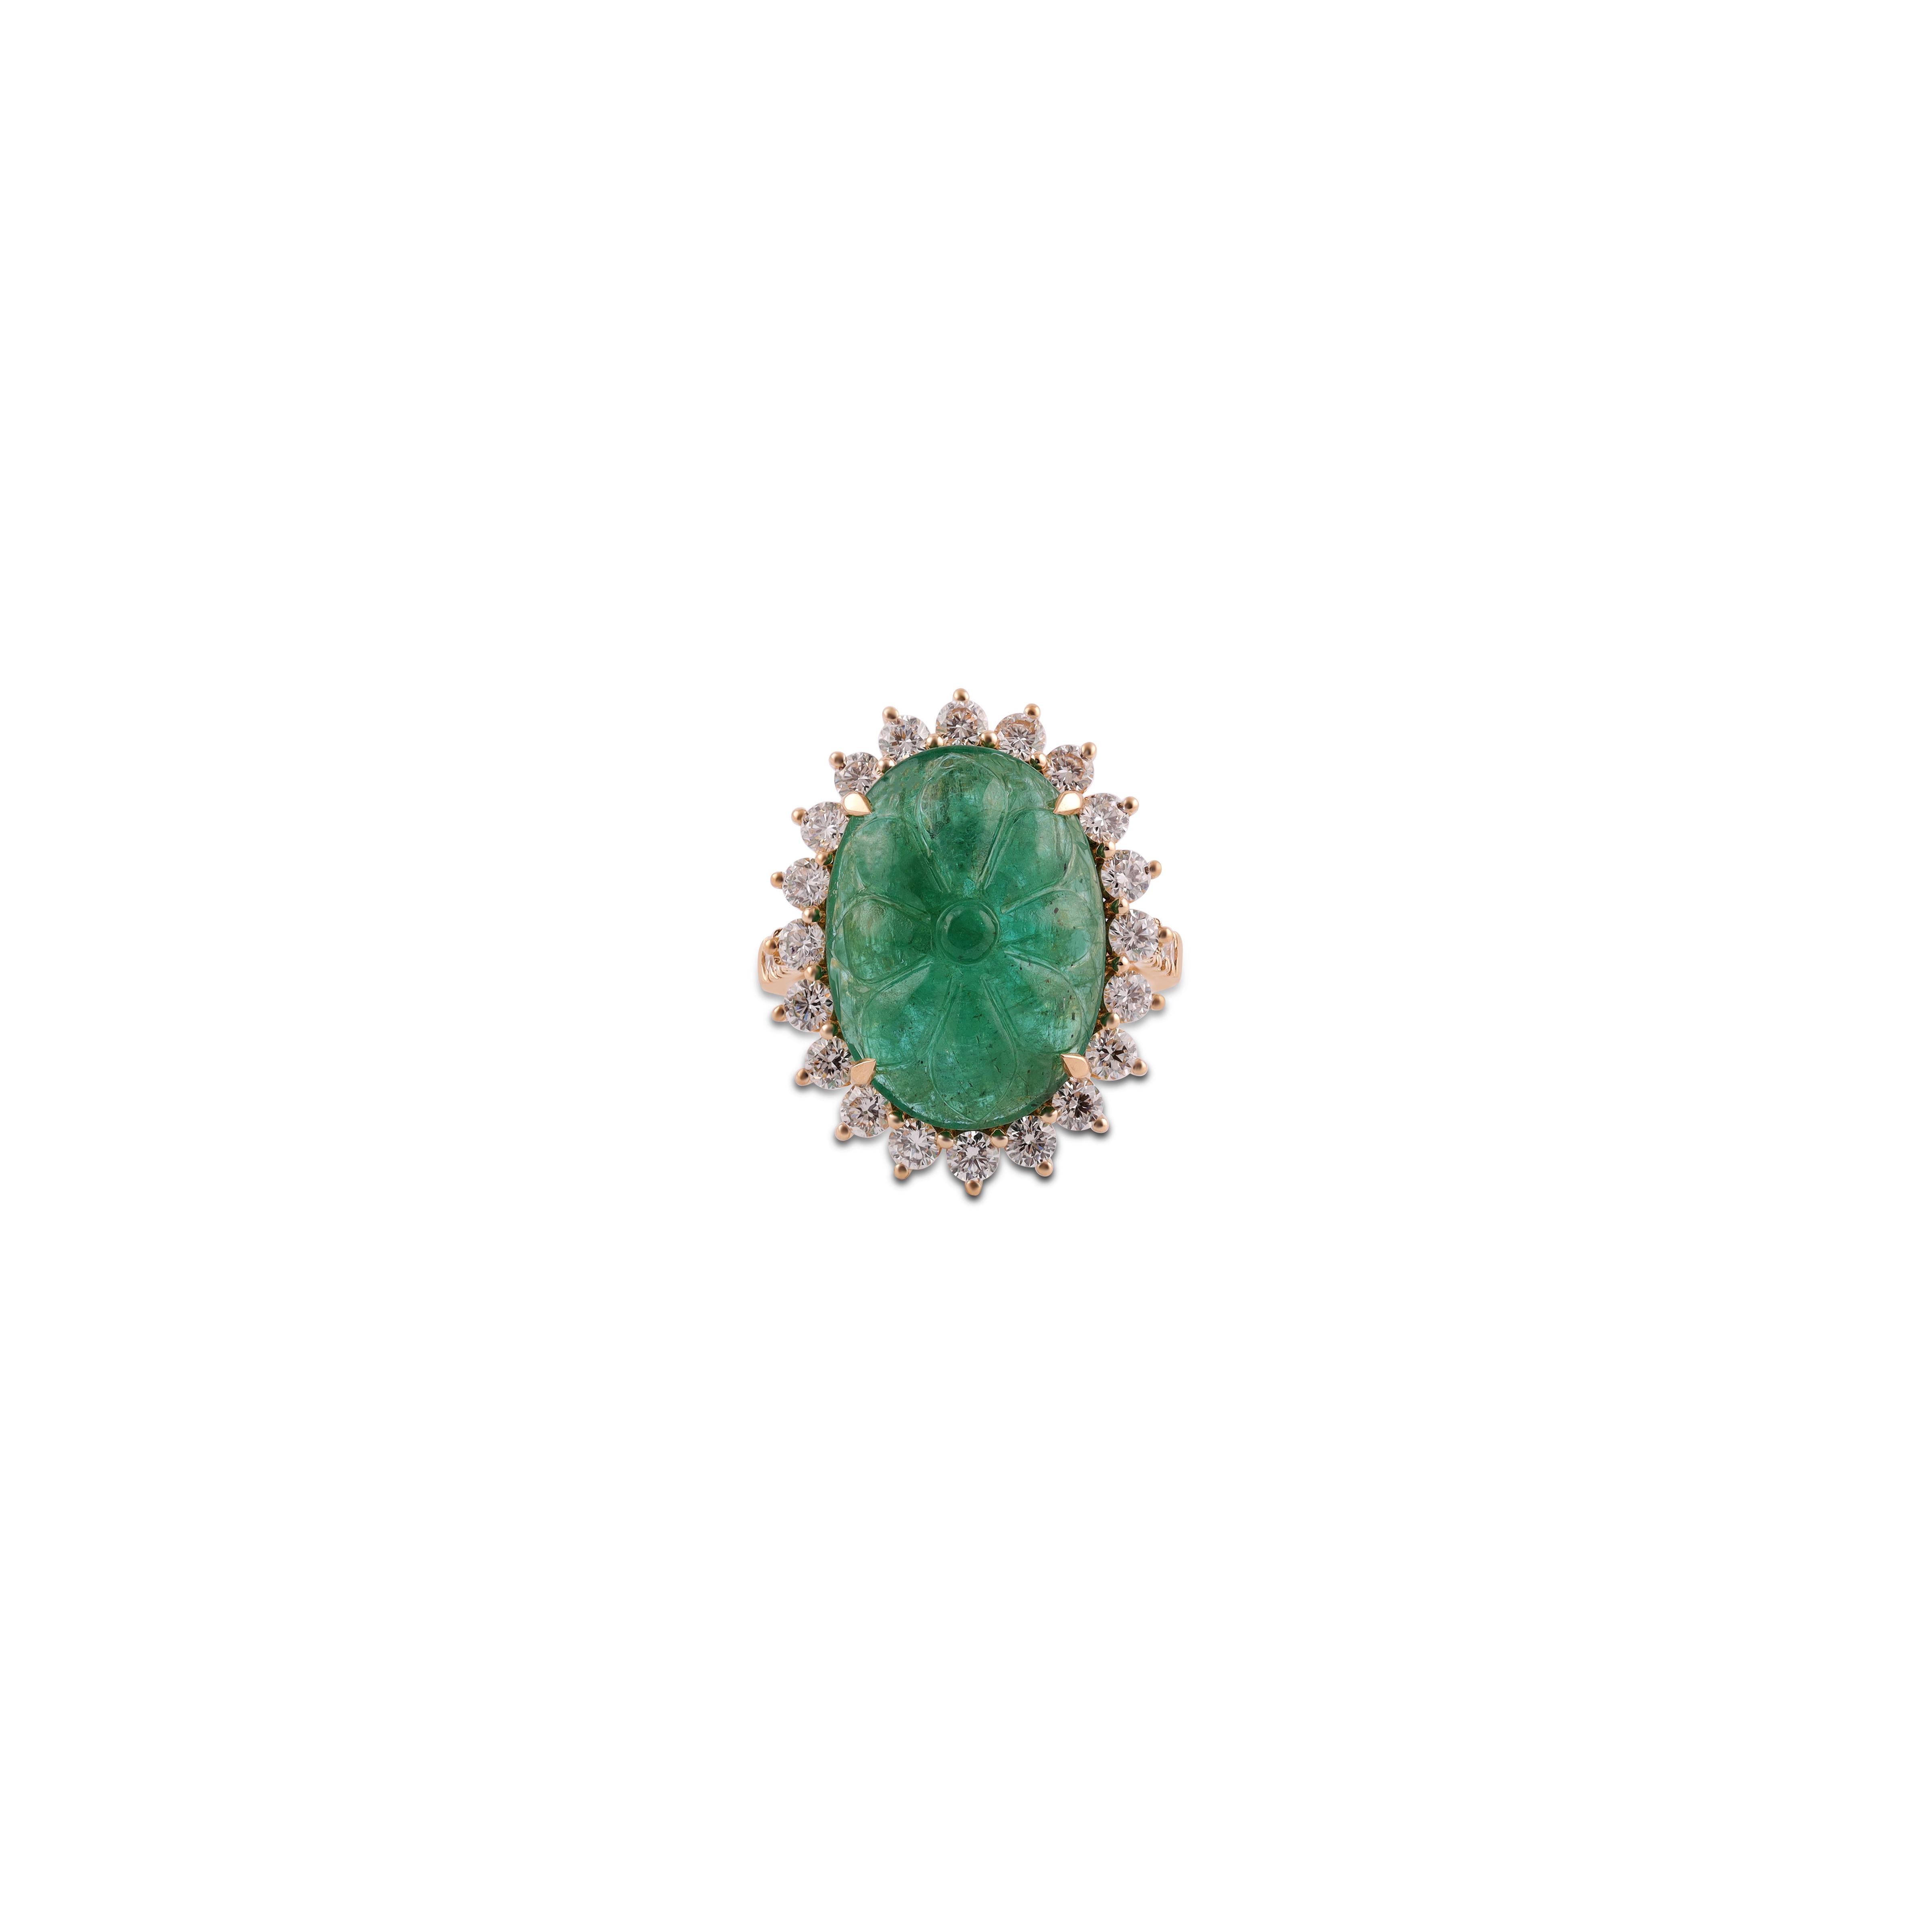 This is an elegant emerald & diamond ring studded in 18k Yellow gold with 1 piece of Carved Zambian emerald weight 11.15 carat which is surrounded by 30 pieces of round shaped diamonds weight 1.48 carat, this entire ring studded in 18k Yellow gold